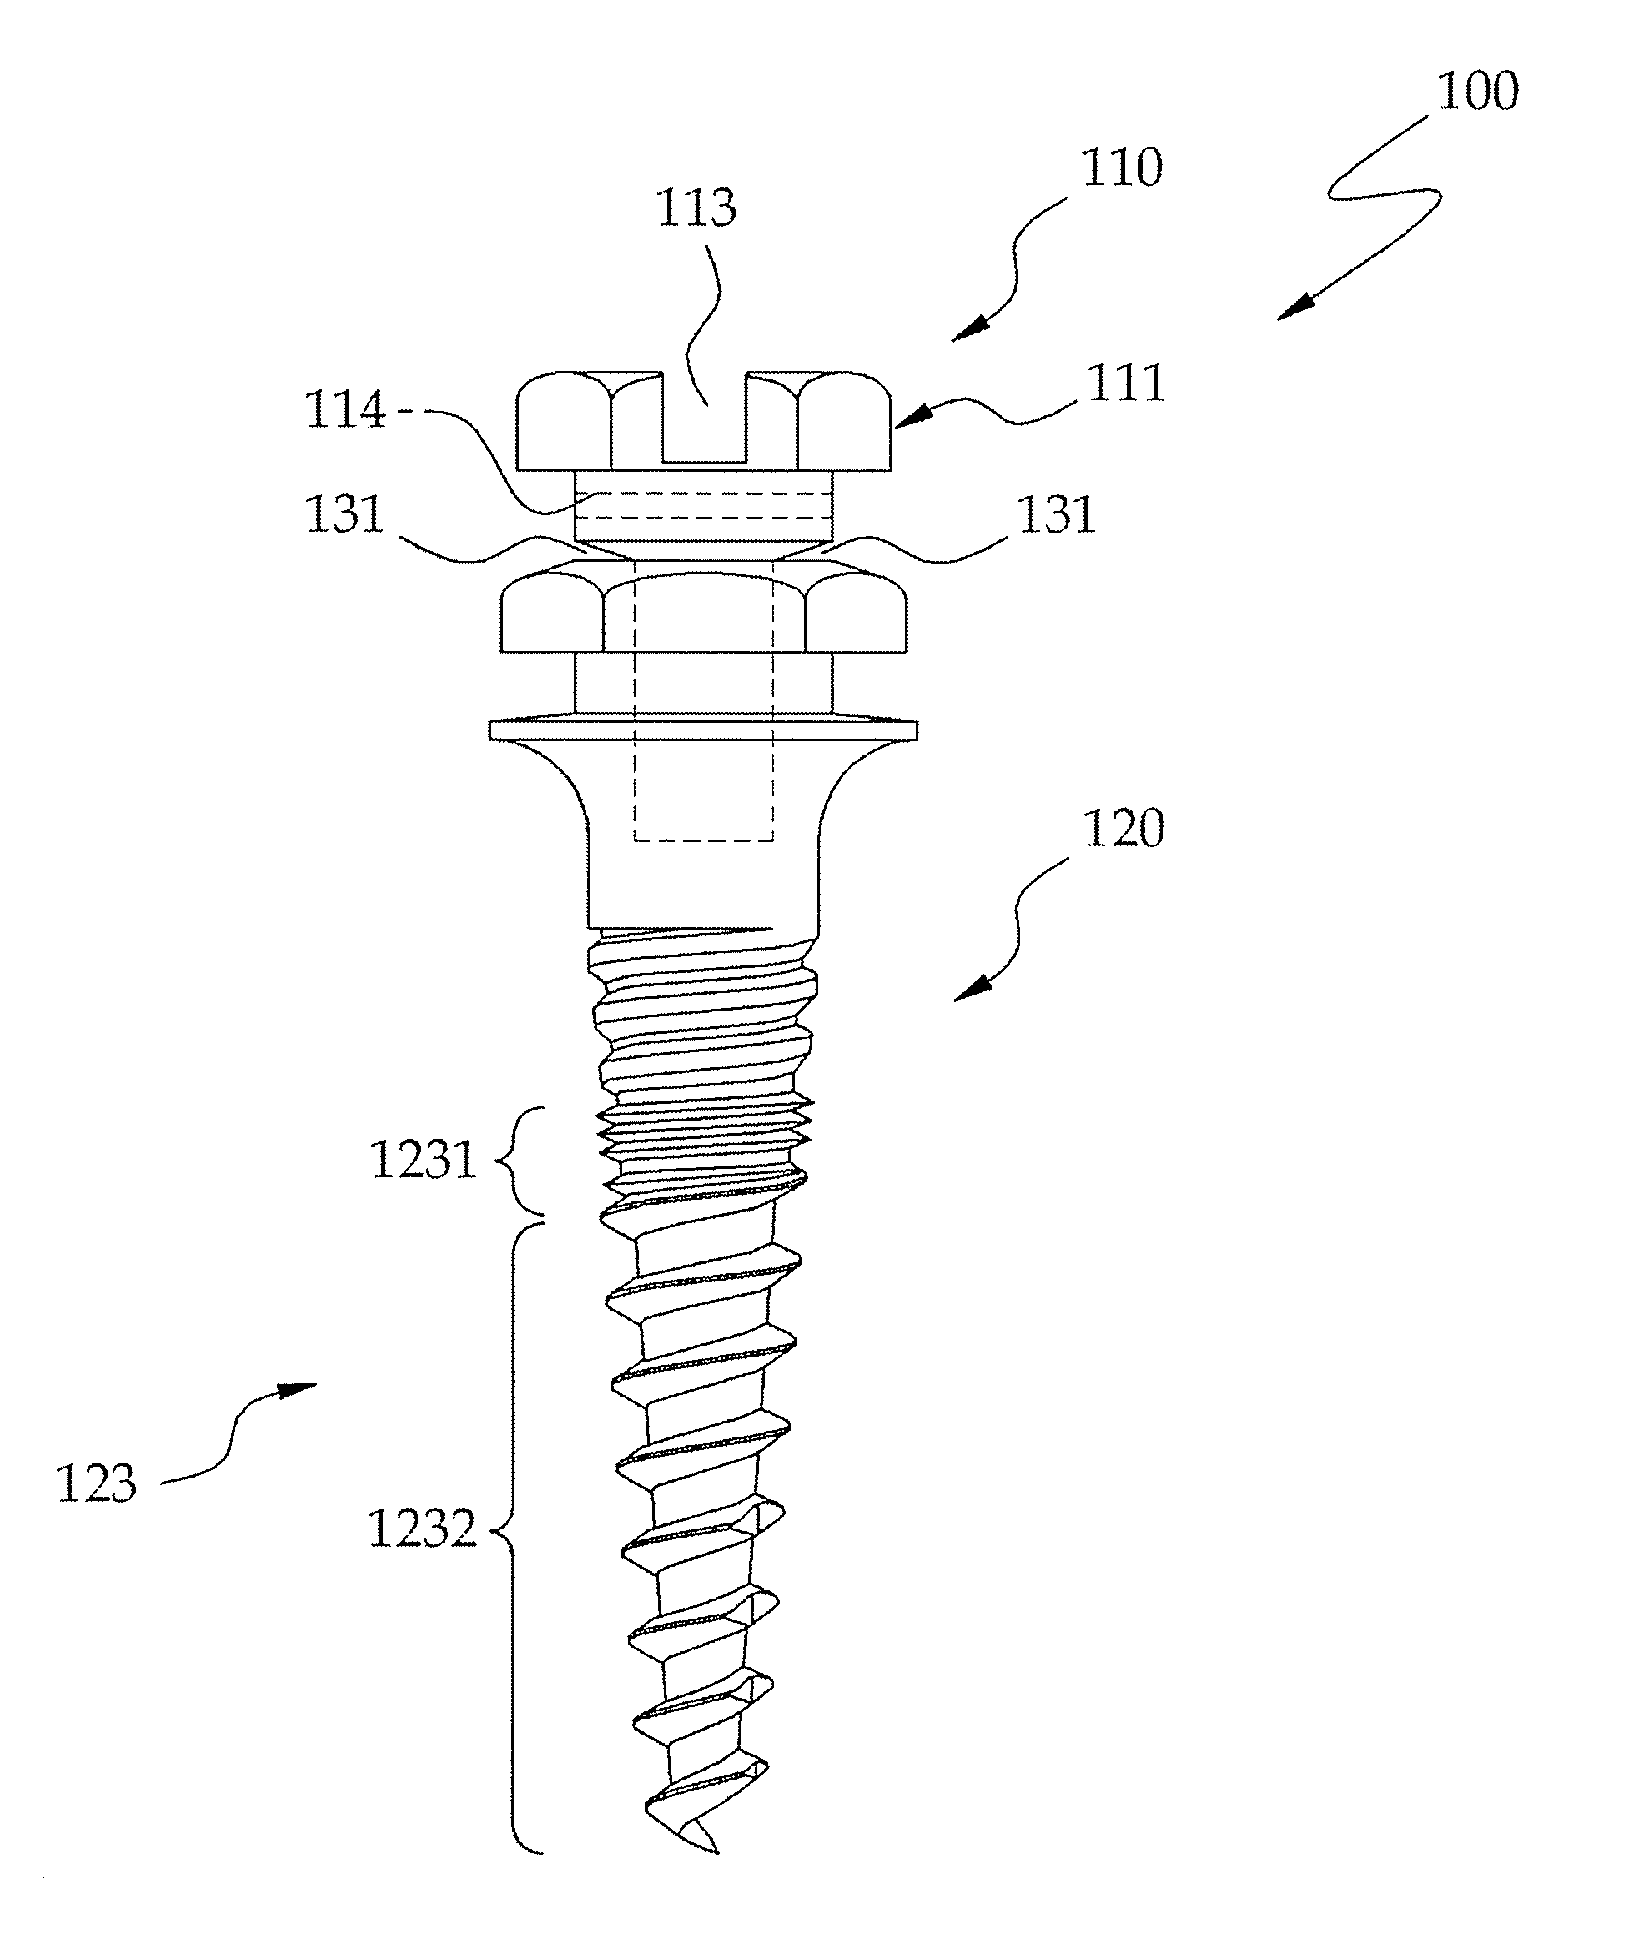 Orthodontic implant screw assembly